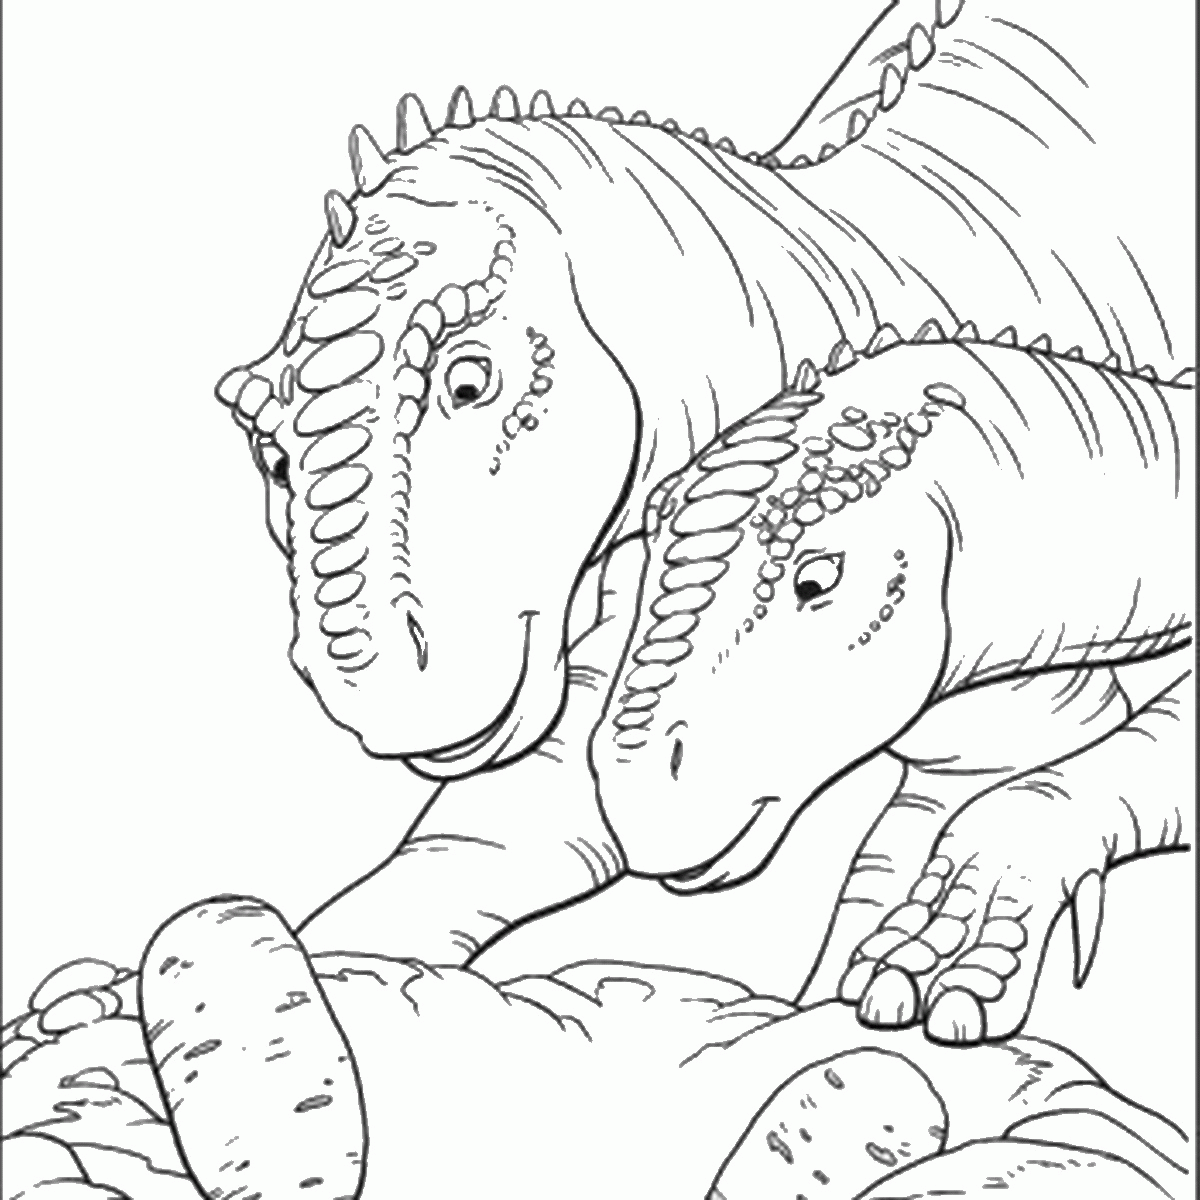 Jurassic Park Coloring Page - Coloring Home